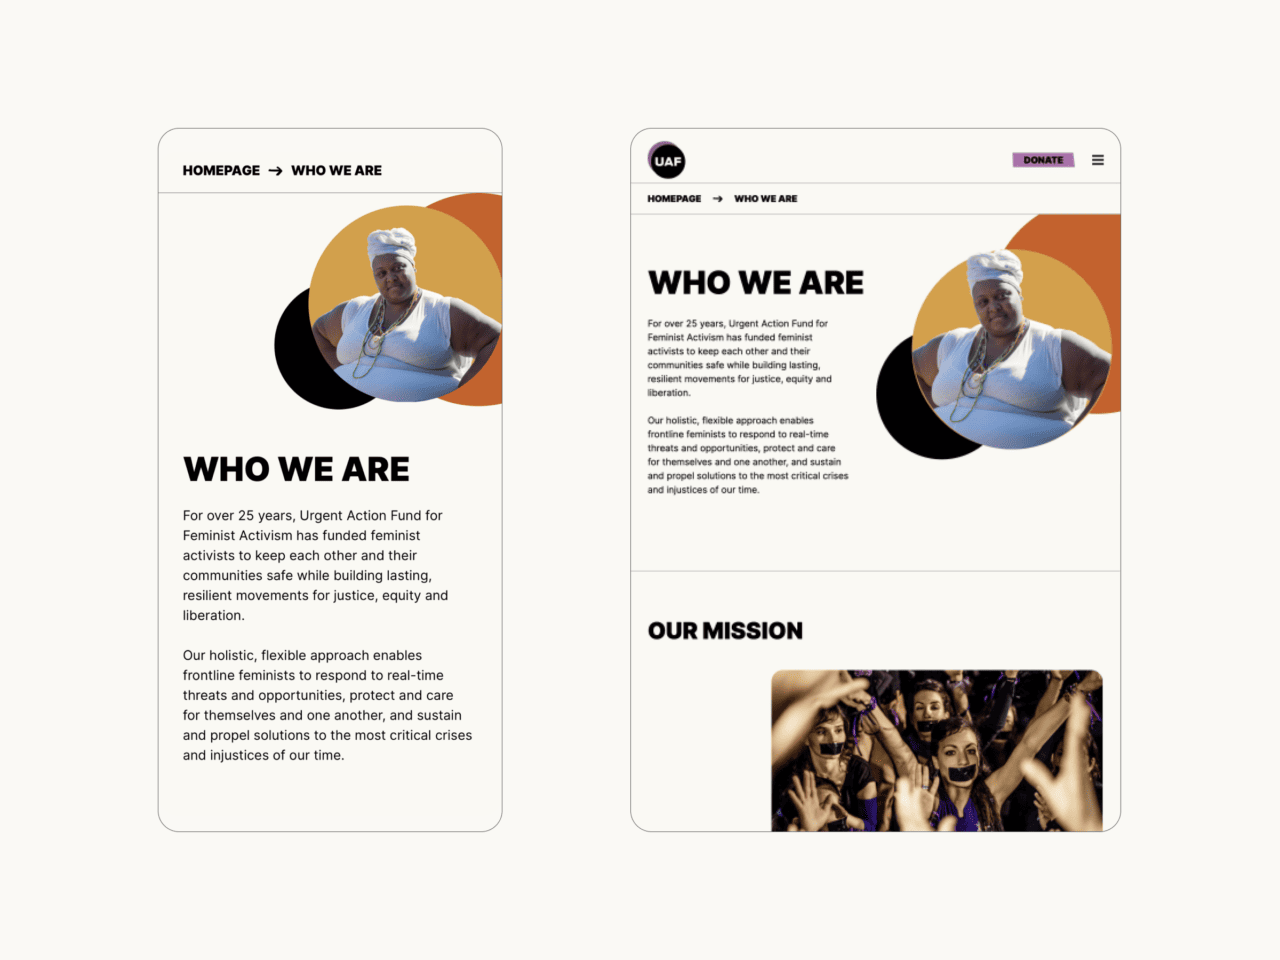 examples of the mobile layout for UAF's 'Who We Are' page. The designs differ depending on the mobile screensize, so on larger frames, the image sits beside the title text and on smaller mobile screens, images sit above titles and body copy.